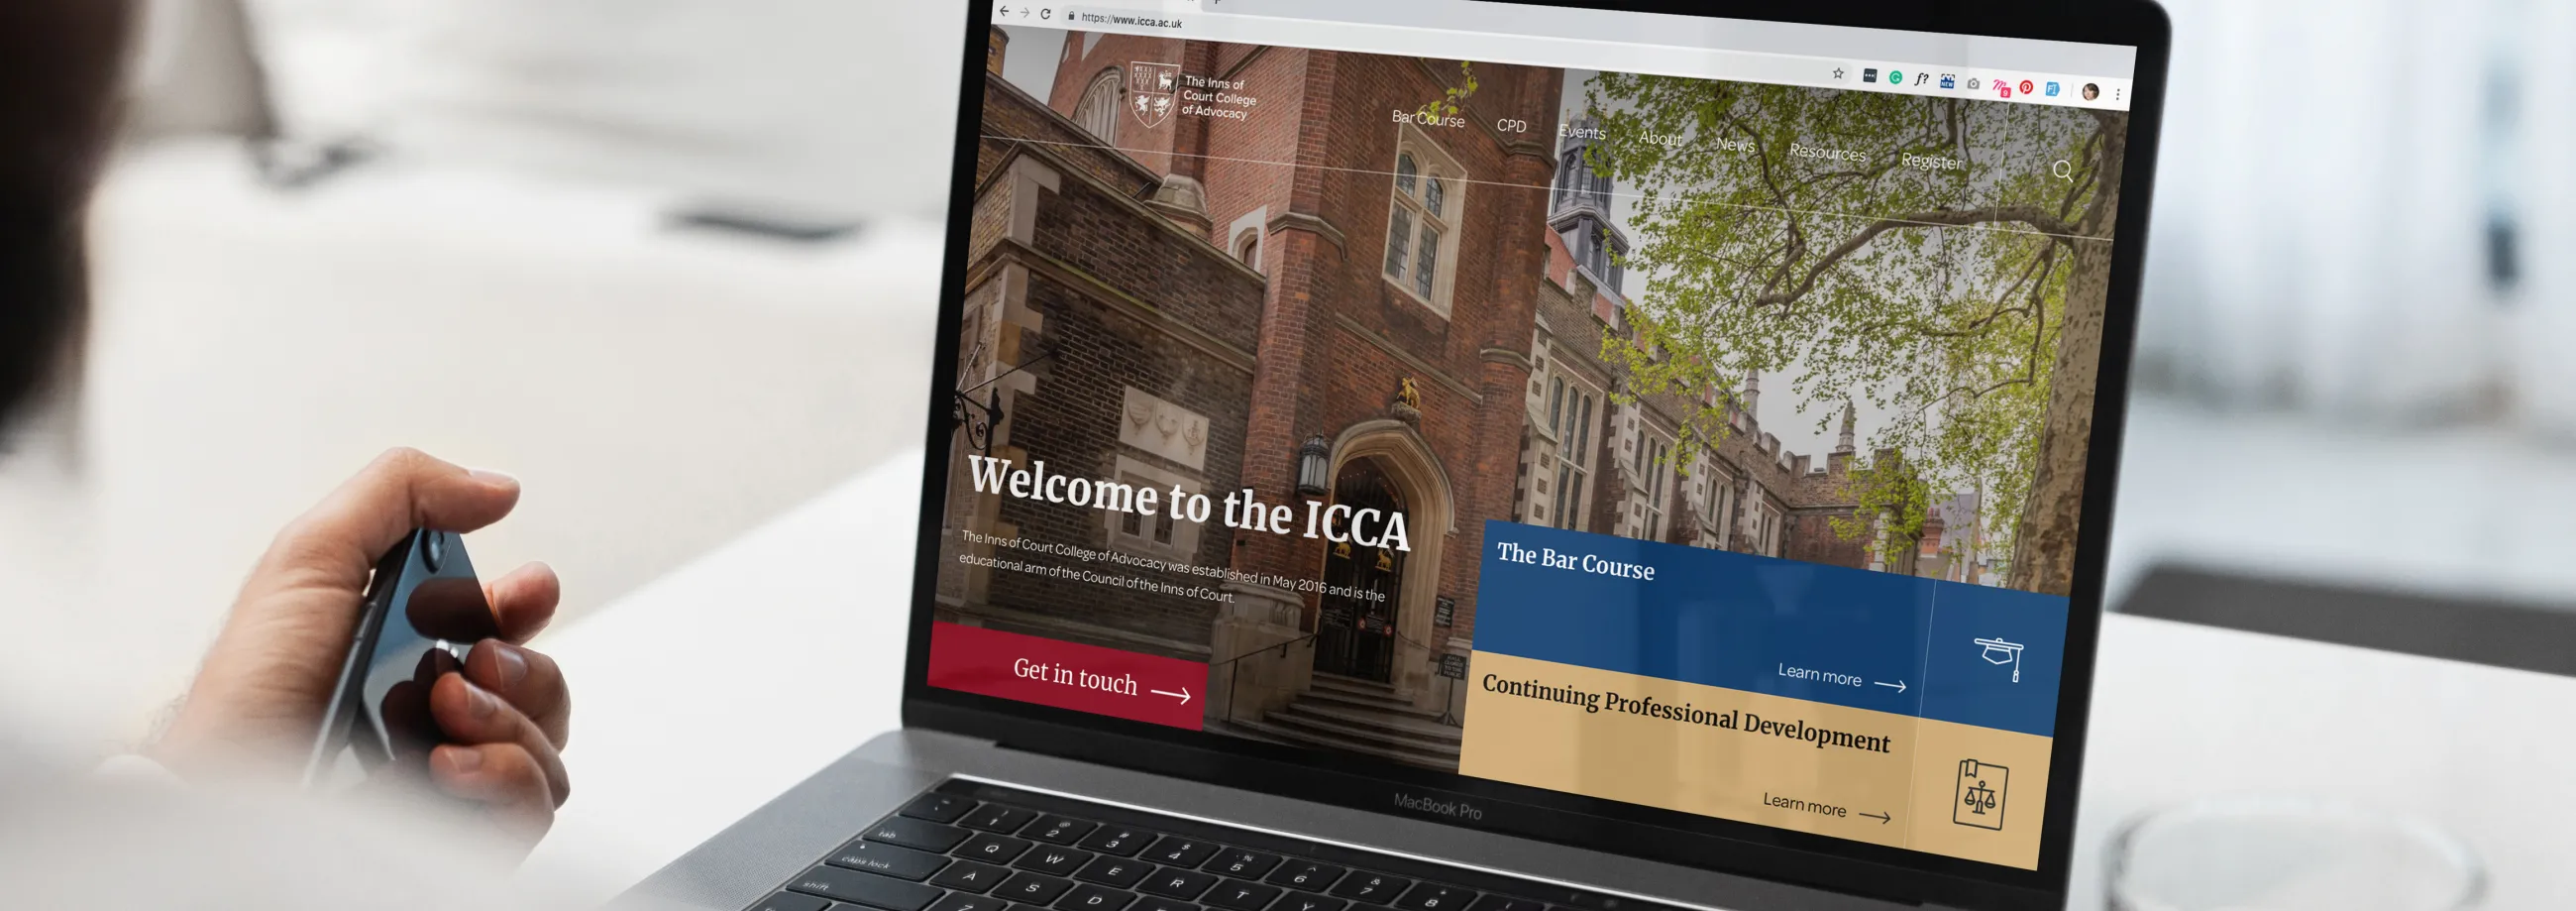 Inns of Court College of Advocacy (ICCA) website on a computer